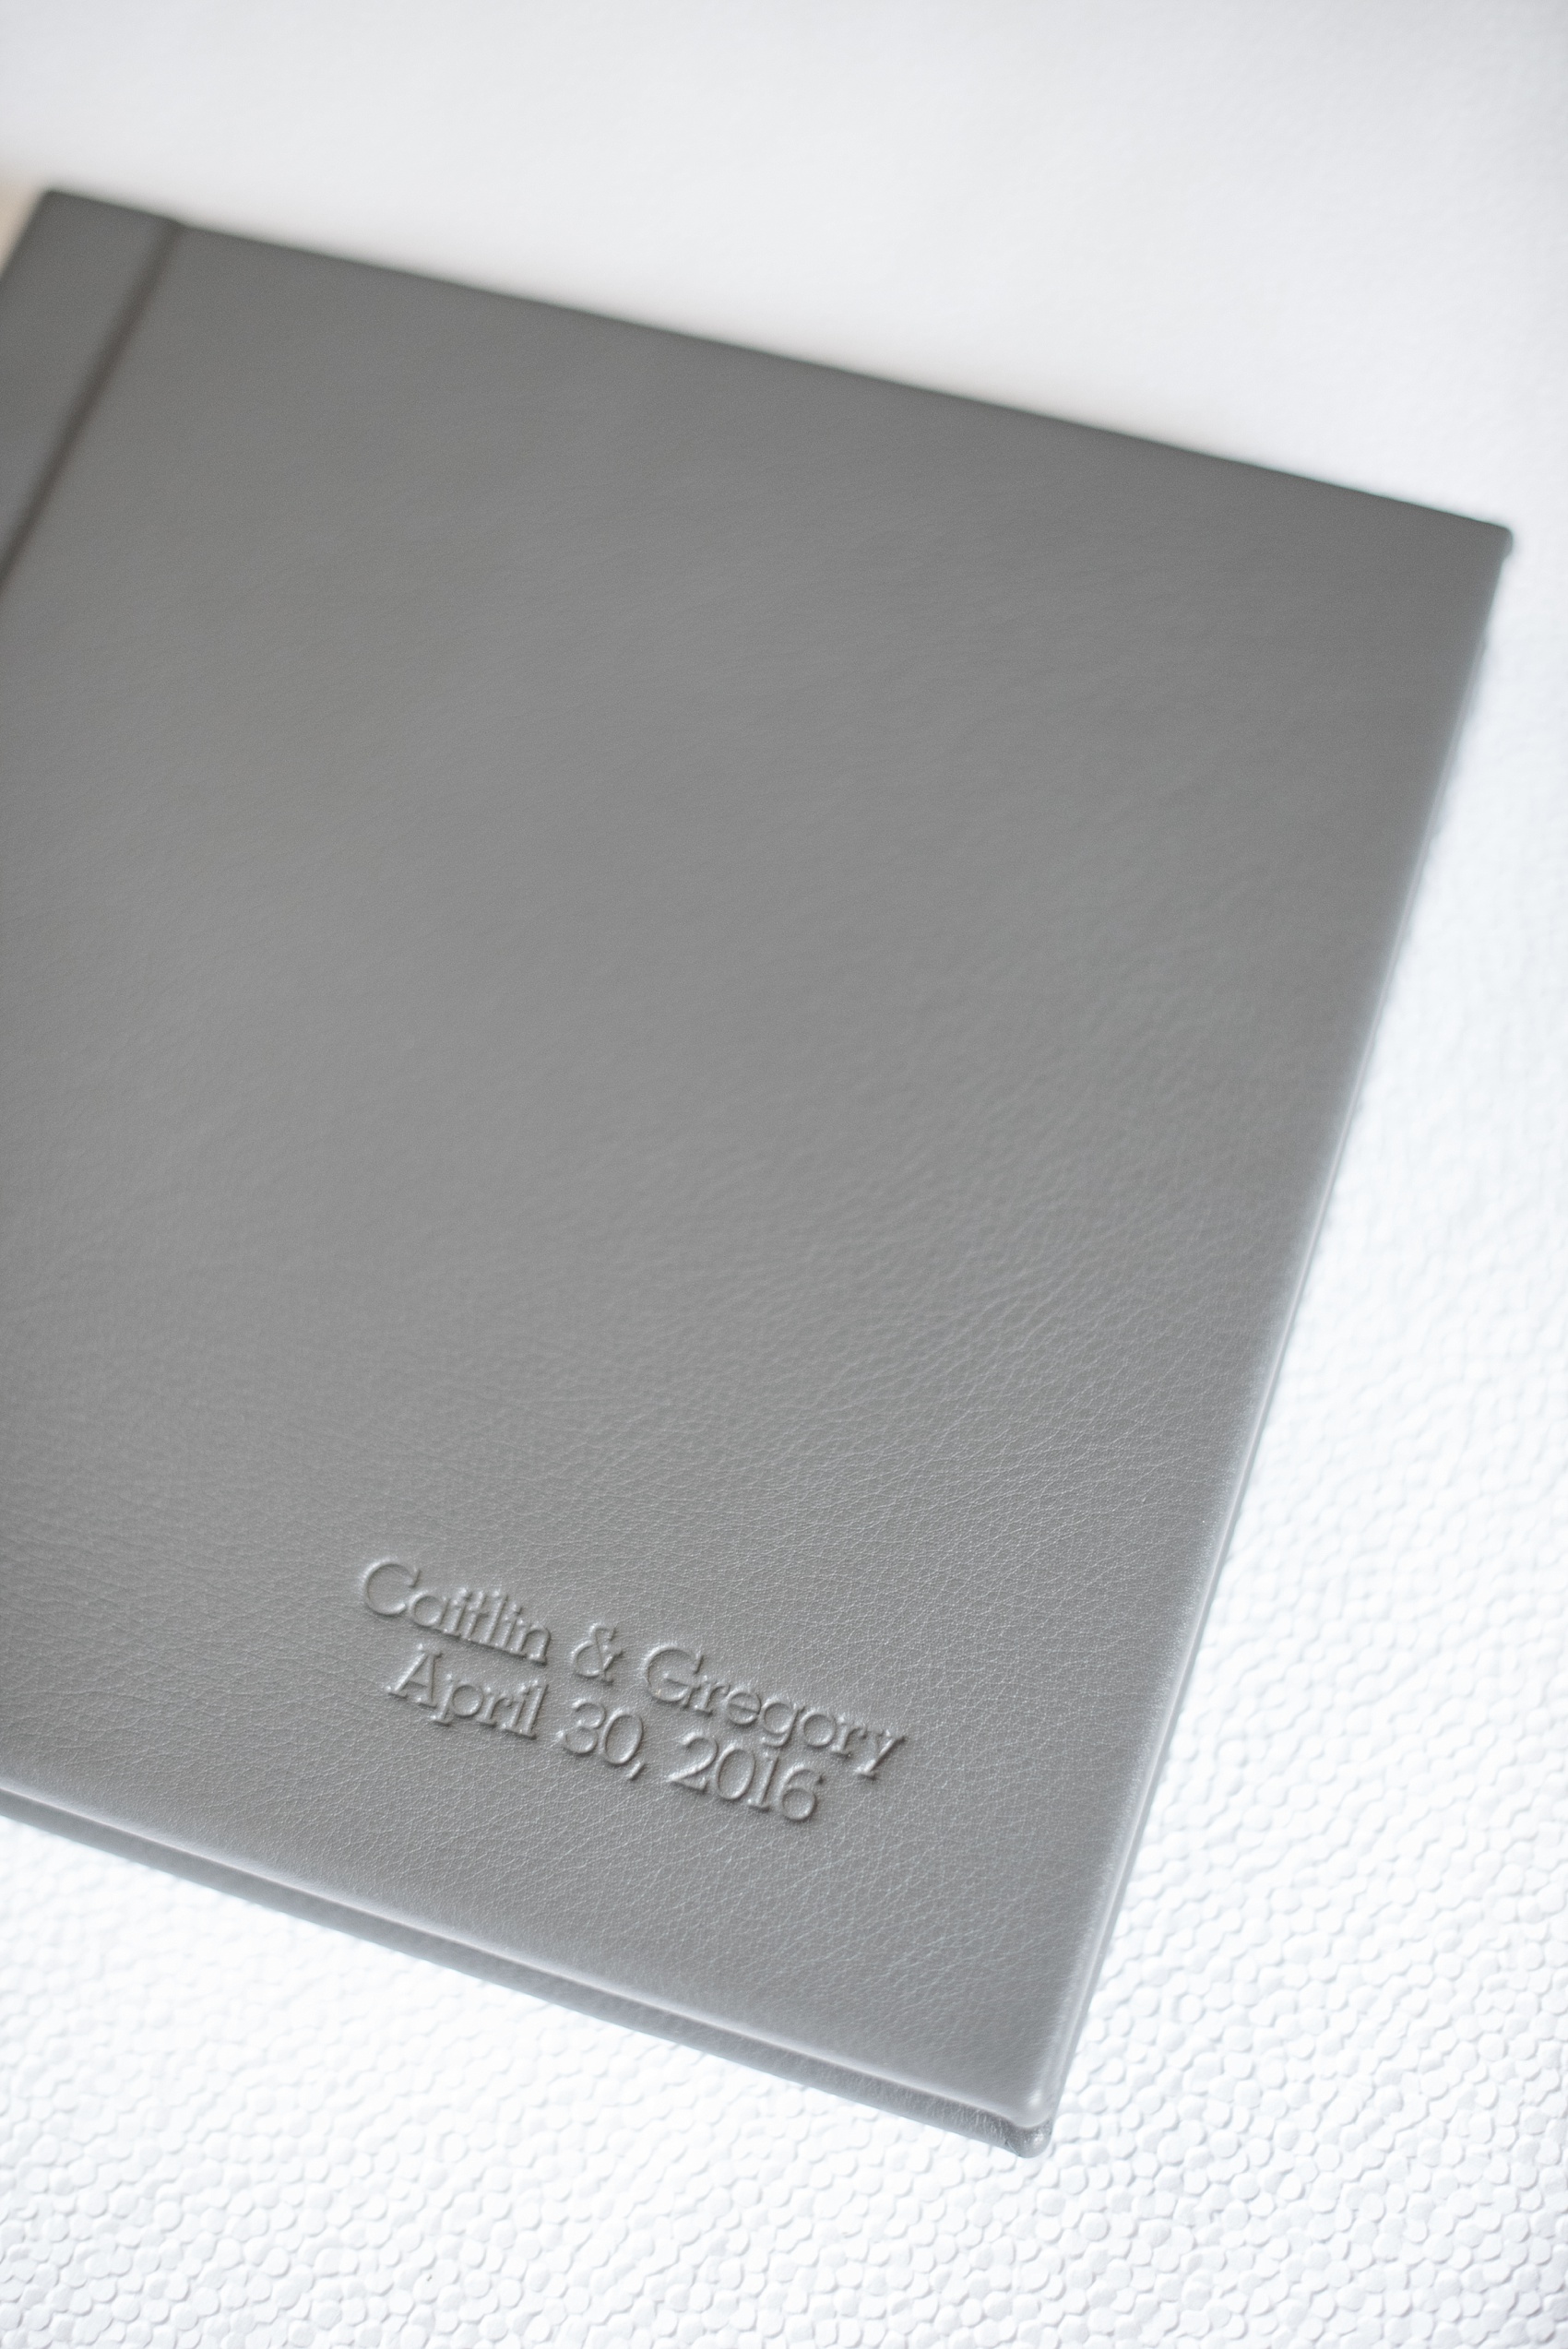 Mikkel Paige Photography grey leather wedding album book from The Harbor Club at Prime on Long Island.